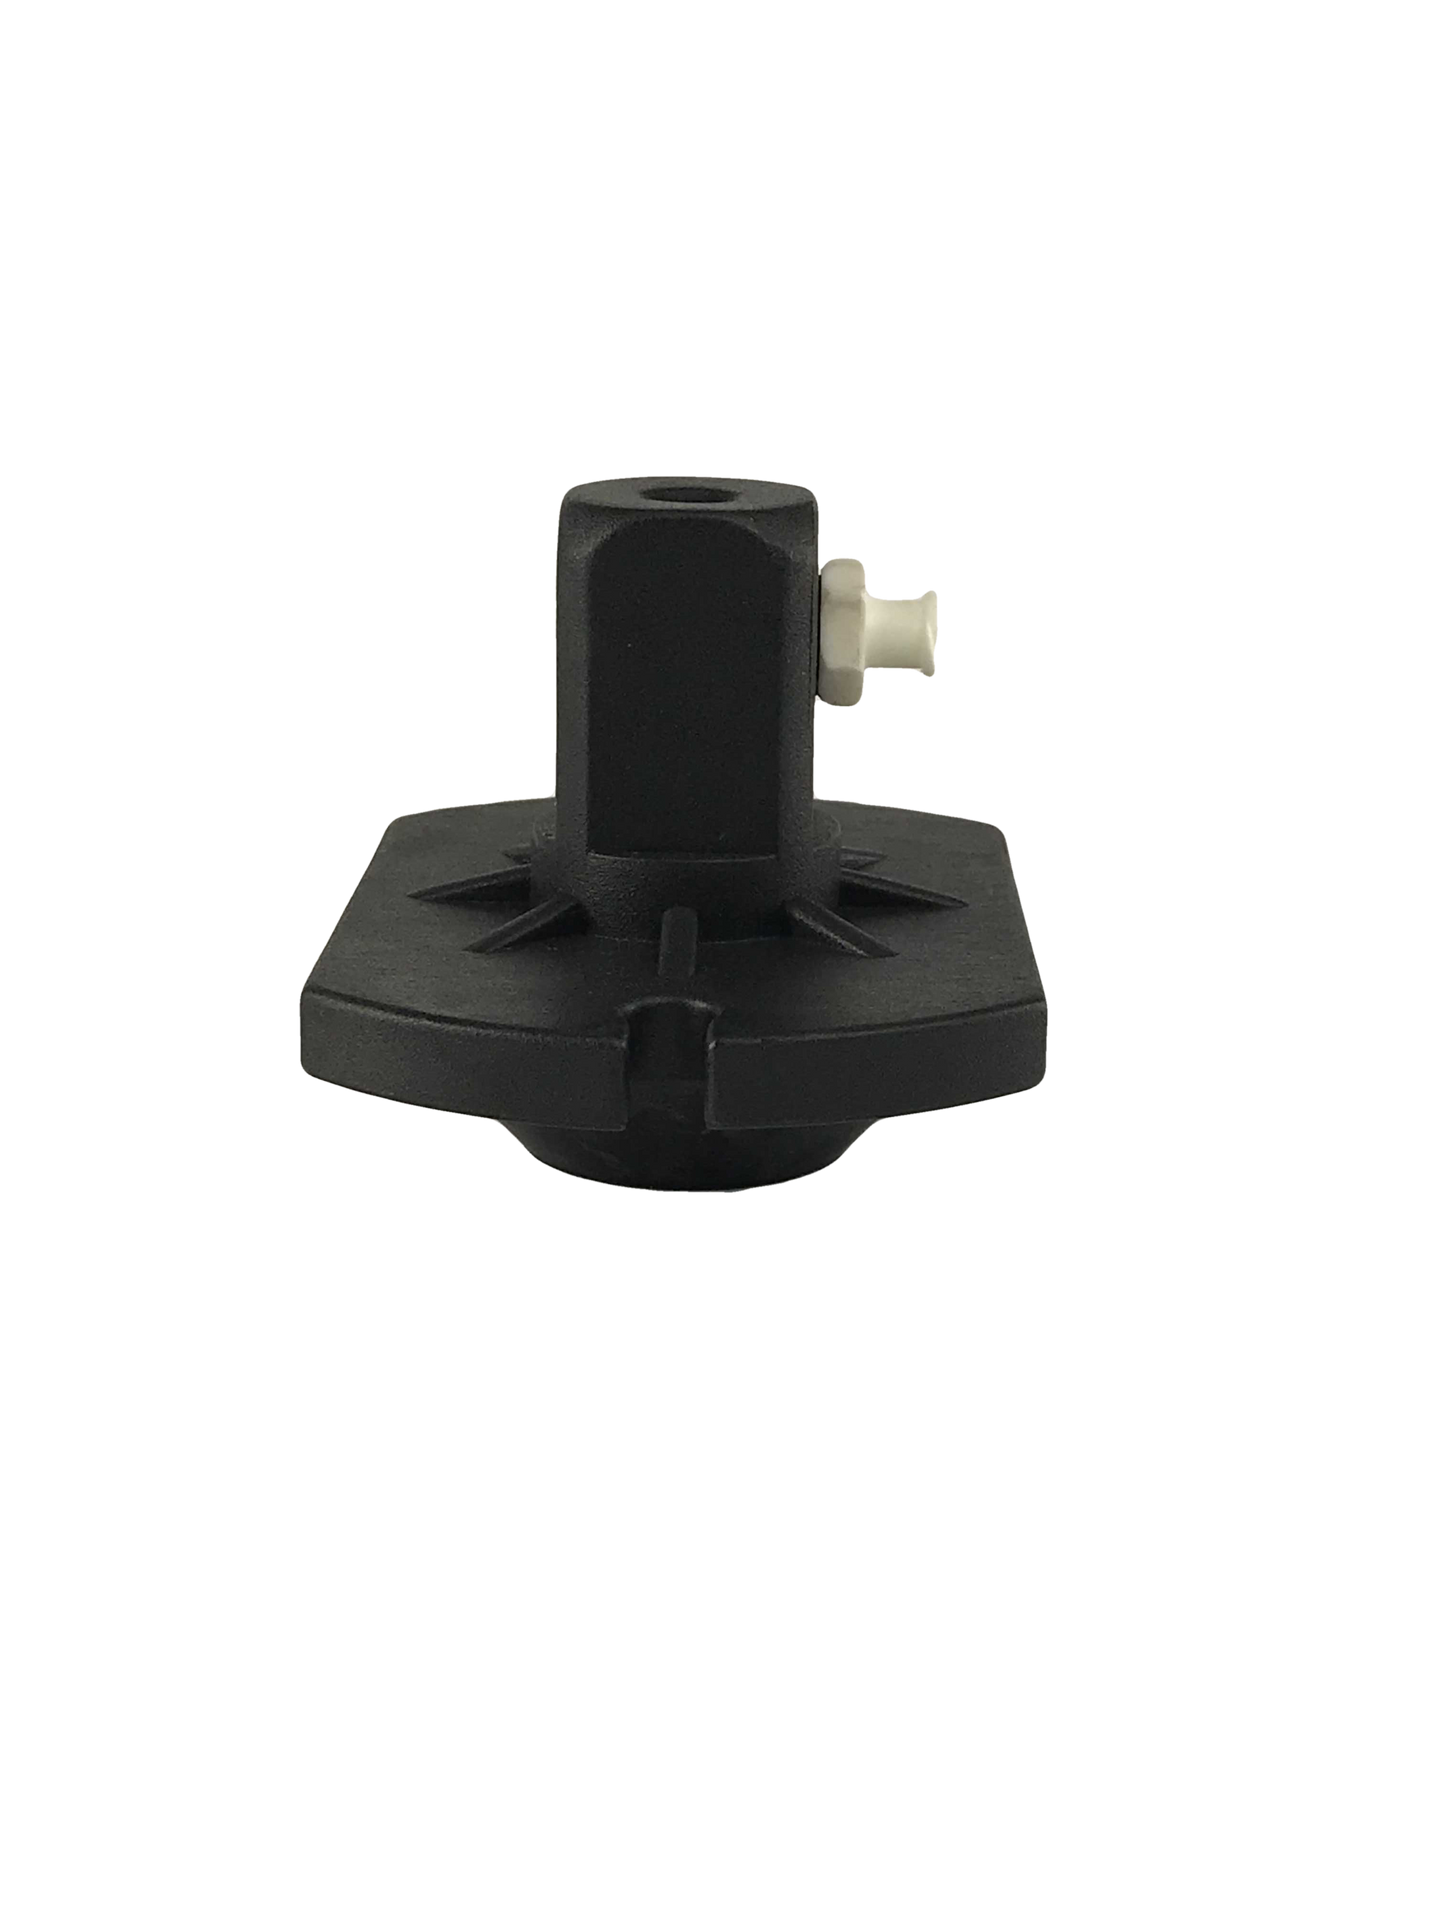 This is a black and white image of a tool called a BC-0712 Master Cylinder Cap Adapter. It's used for car maintenance, specifically bleeding brakes. The adapter itself is round and black with ridges on the outside. In the middle, there's a white knob made of plastic.